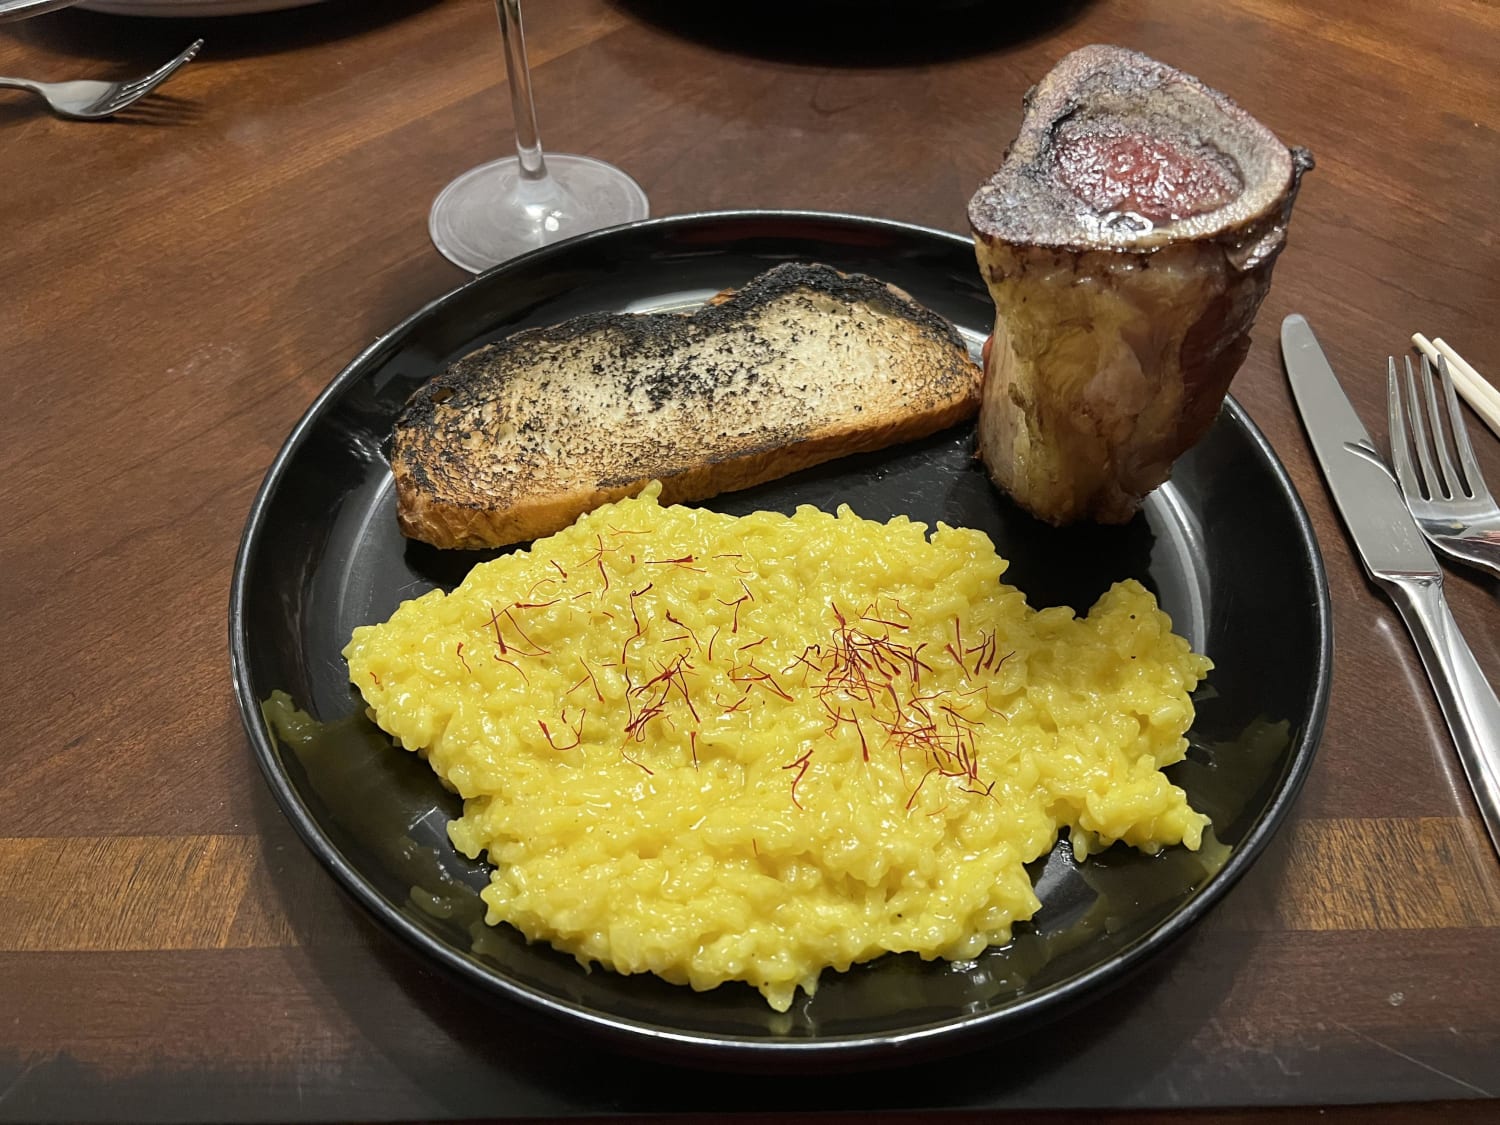 Saffron risotto with roasted bone marrow and marrow grilled bread last night. The leftover risotto will become arancini today.